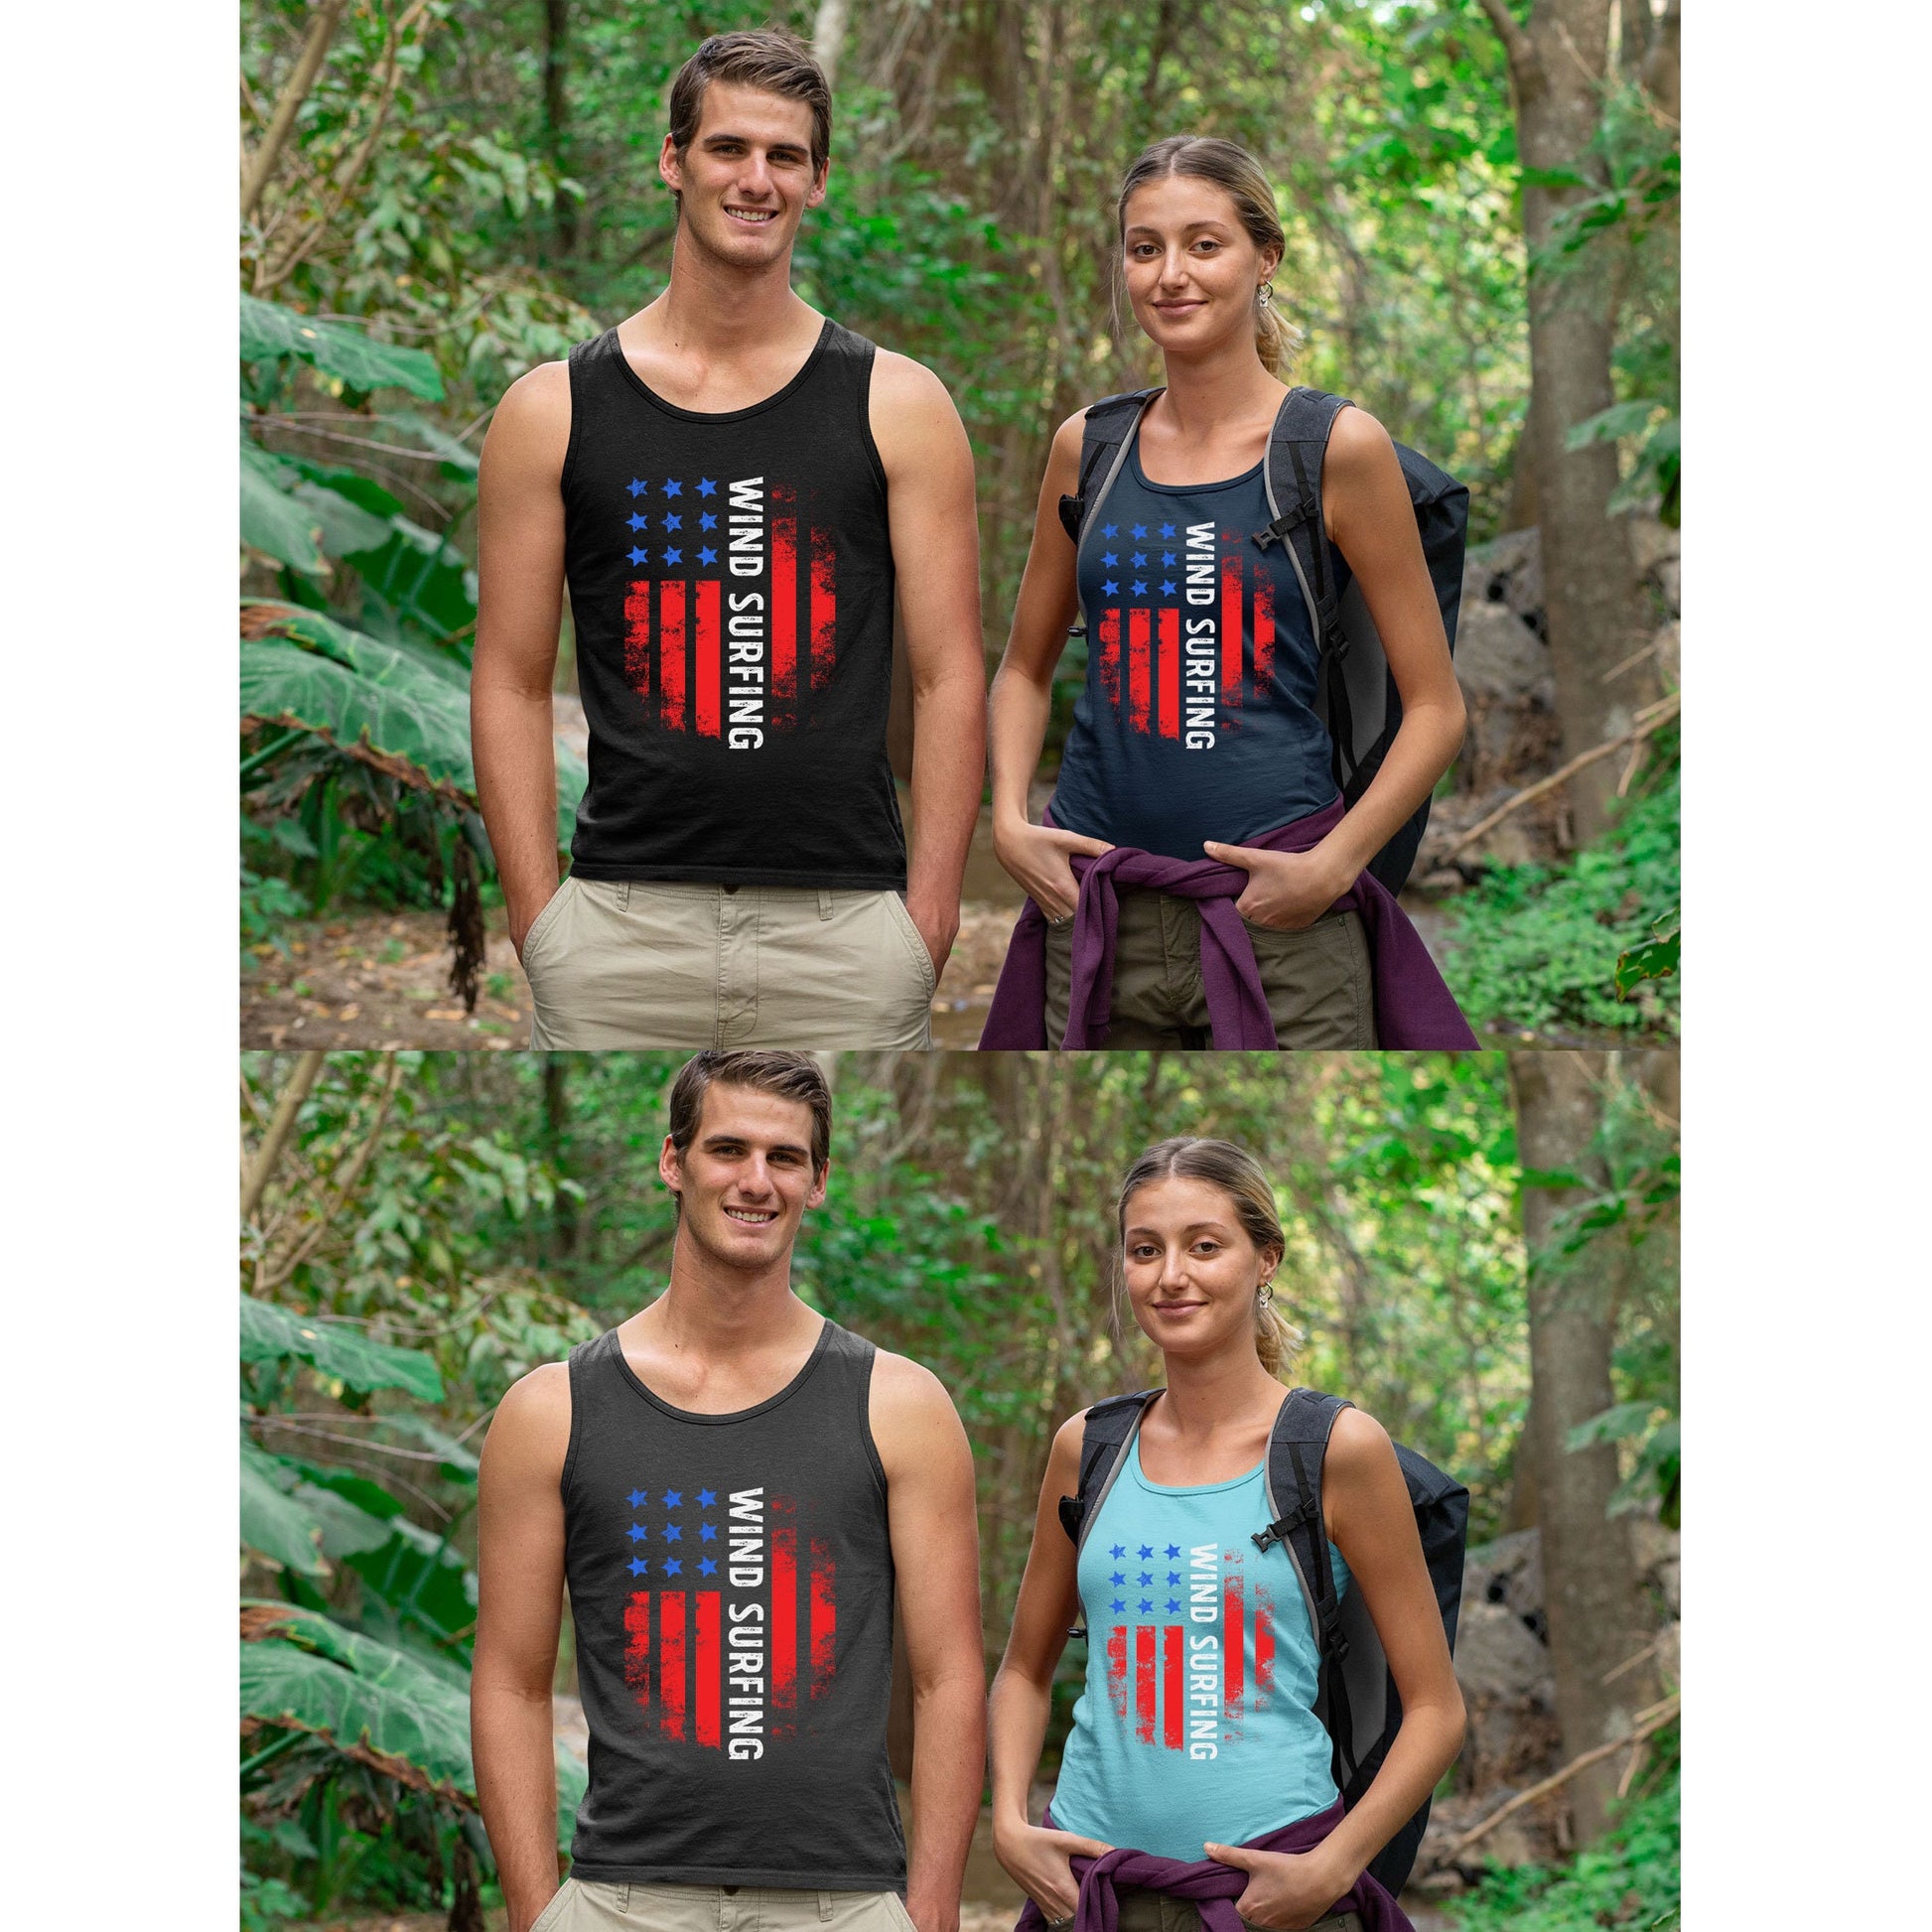 Wind Surfing Team USA Shirt, America Shirt, American Flag 2021, Unisex Comfy, Vintage USA, Kite Surfing Body Board Summer Muscle Tank Top